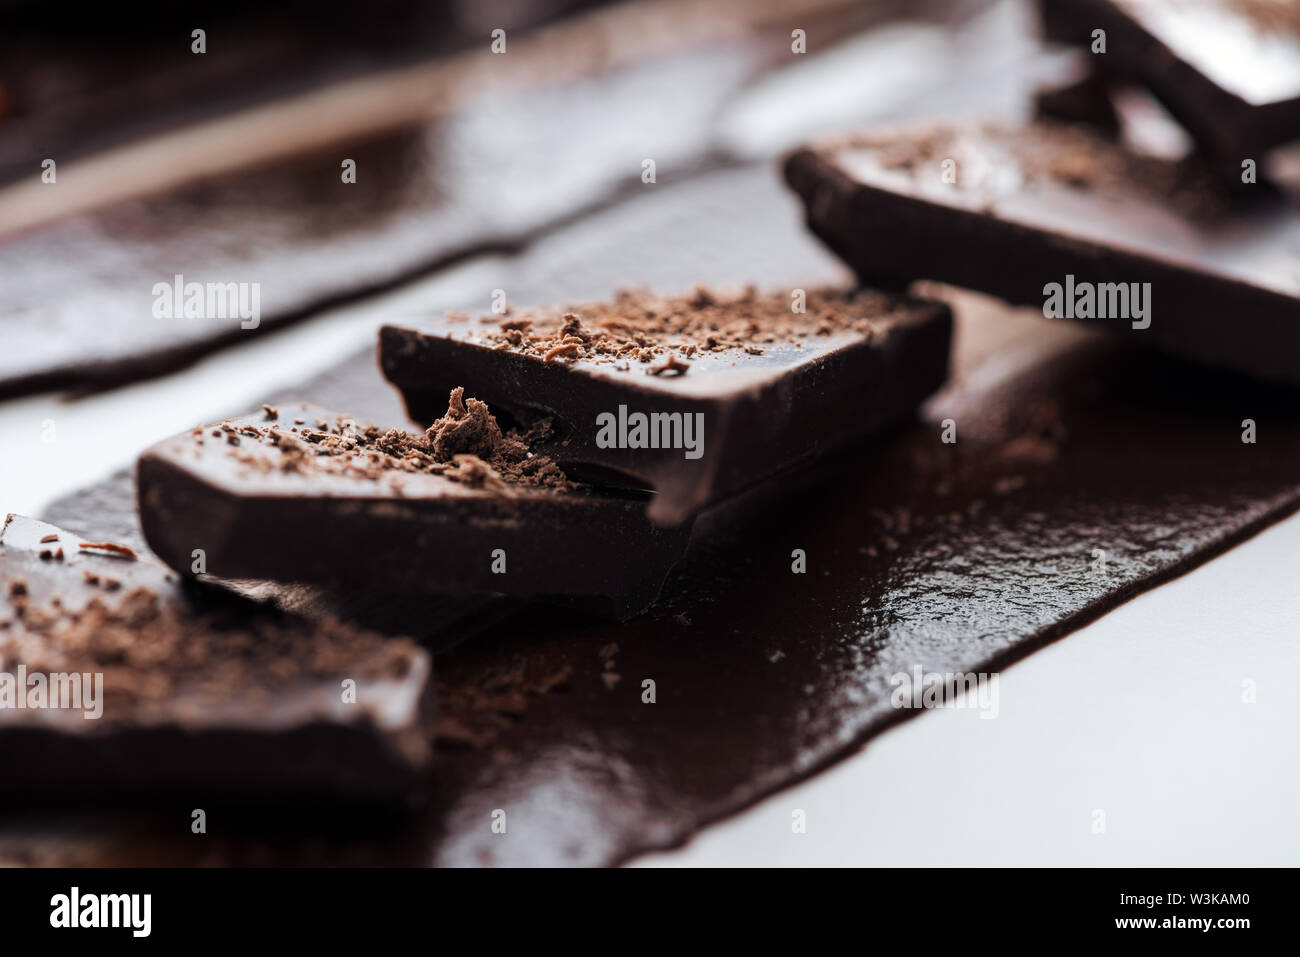 Selective focus of pieces of chocolate bar with cocoa powder and melted chocolate Stock Photo